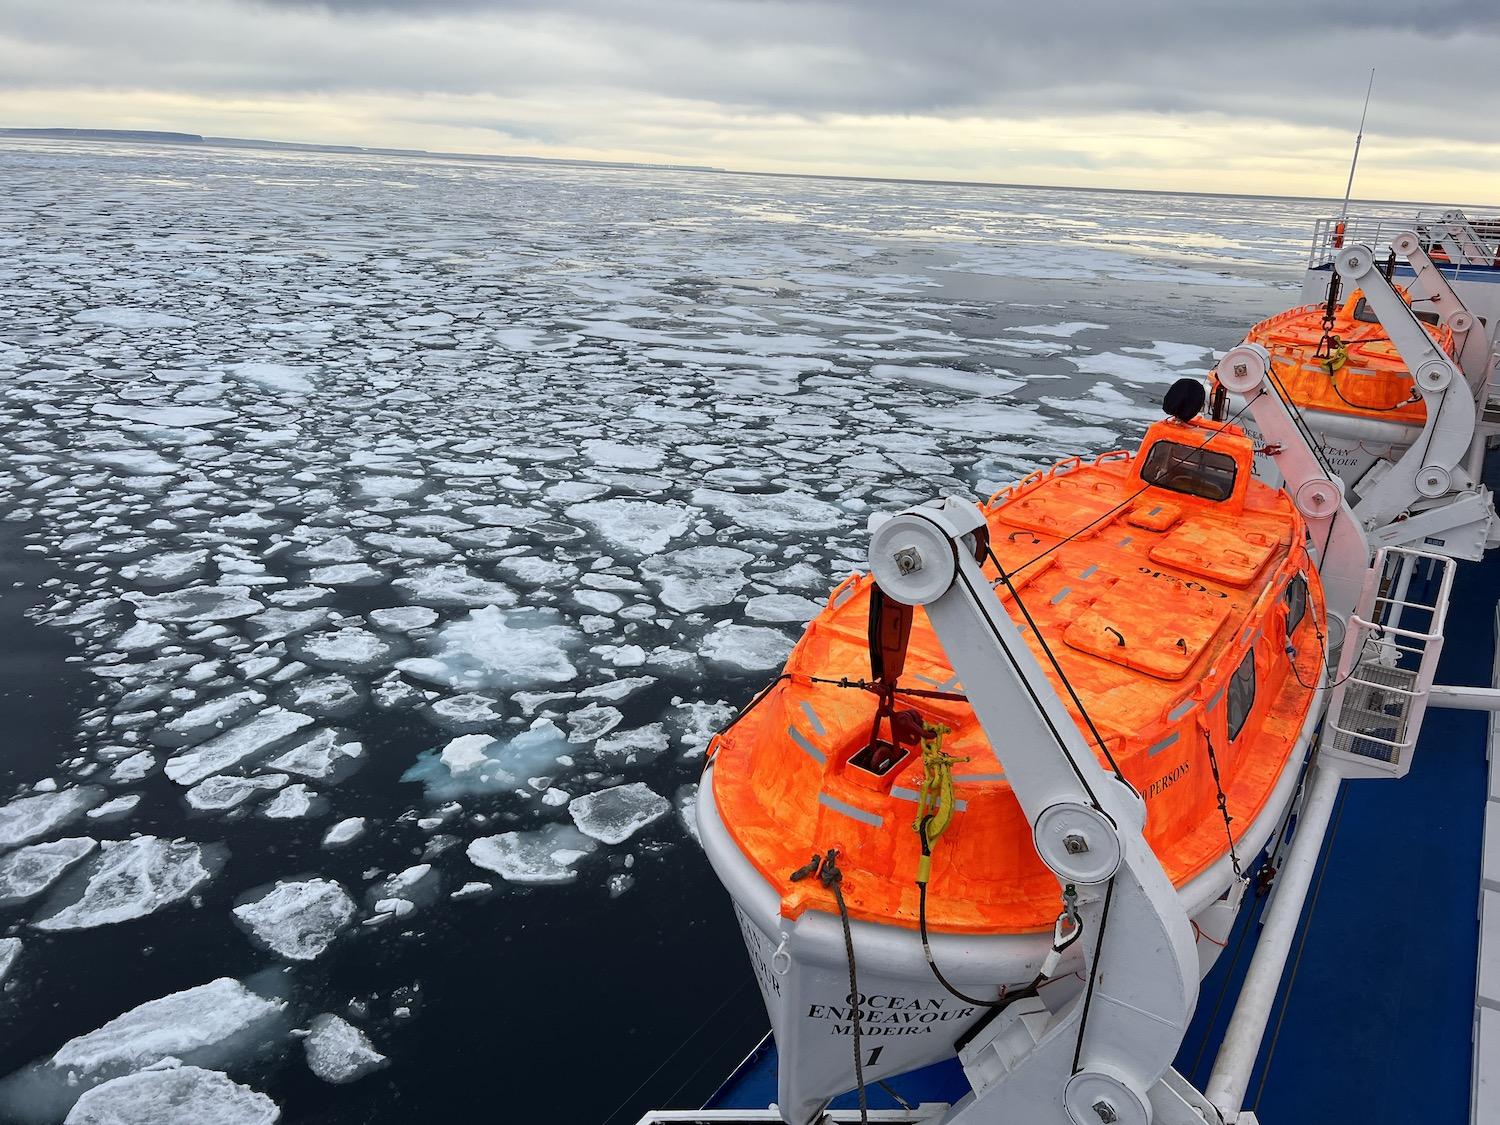 Lifeboats aboard the Ocean Endeavour as she sails through sea ice in Lancaster Sound, Nunavut.